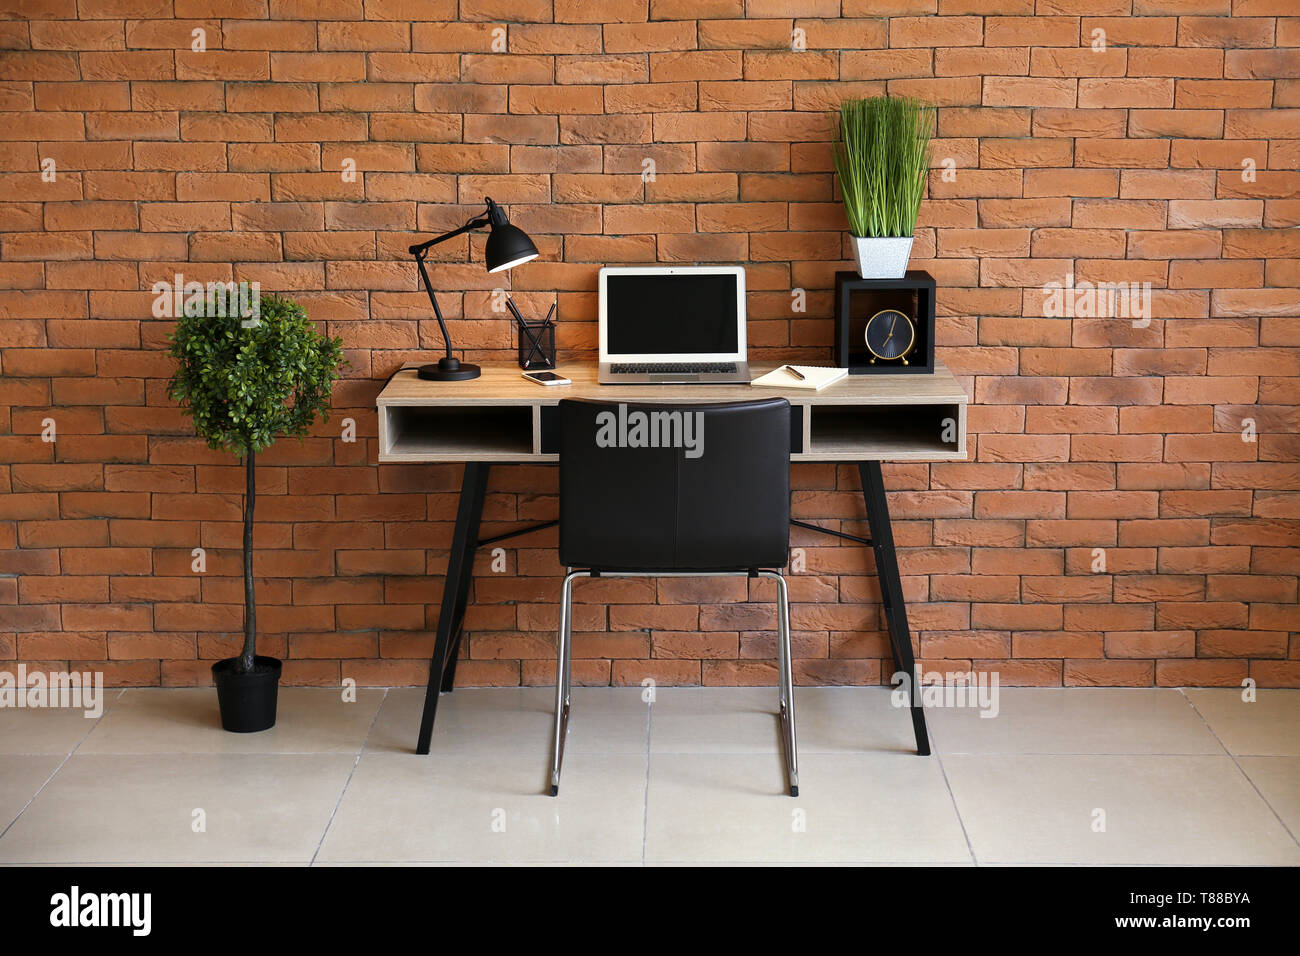 Stylish Workplace With Laptop On Table Near Brick Wall In Office